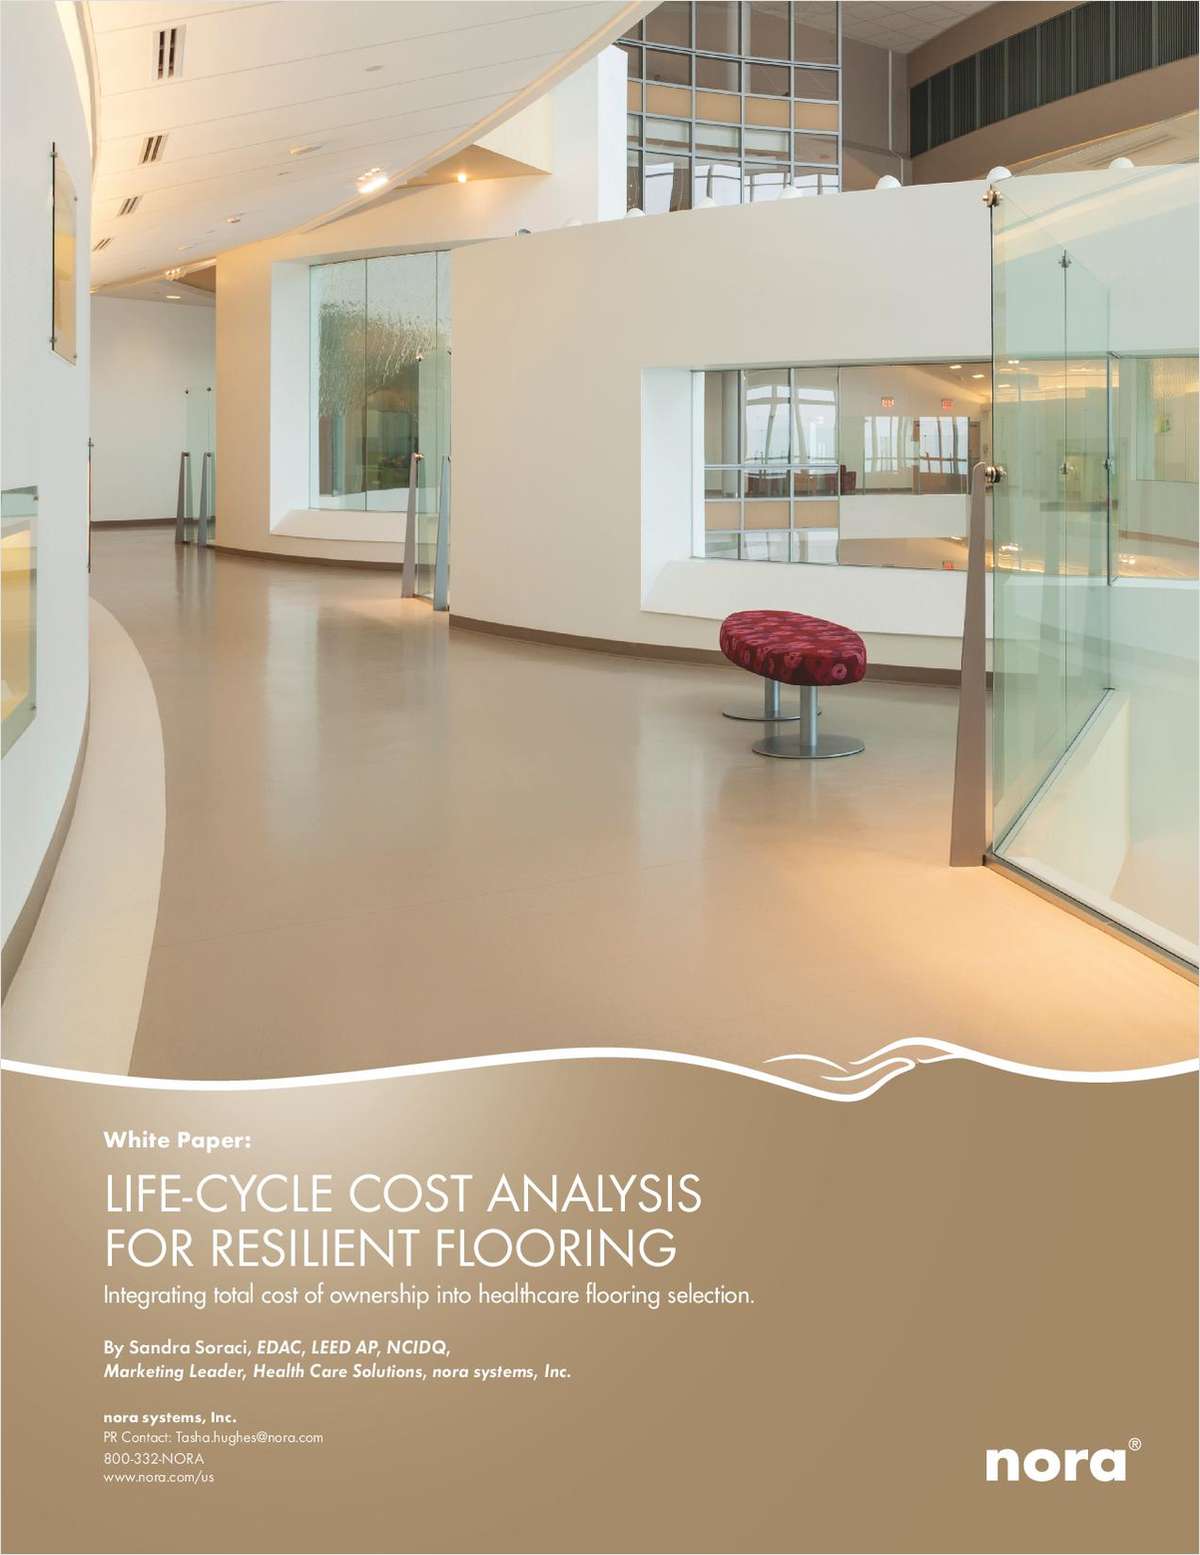 Life-Cycle Cost Analysis for Resilient Flooring